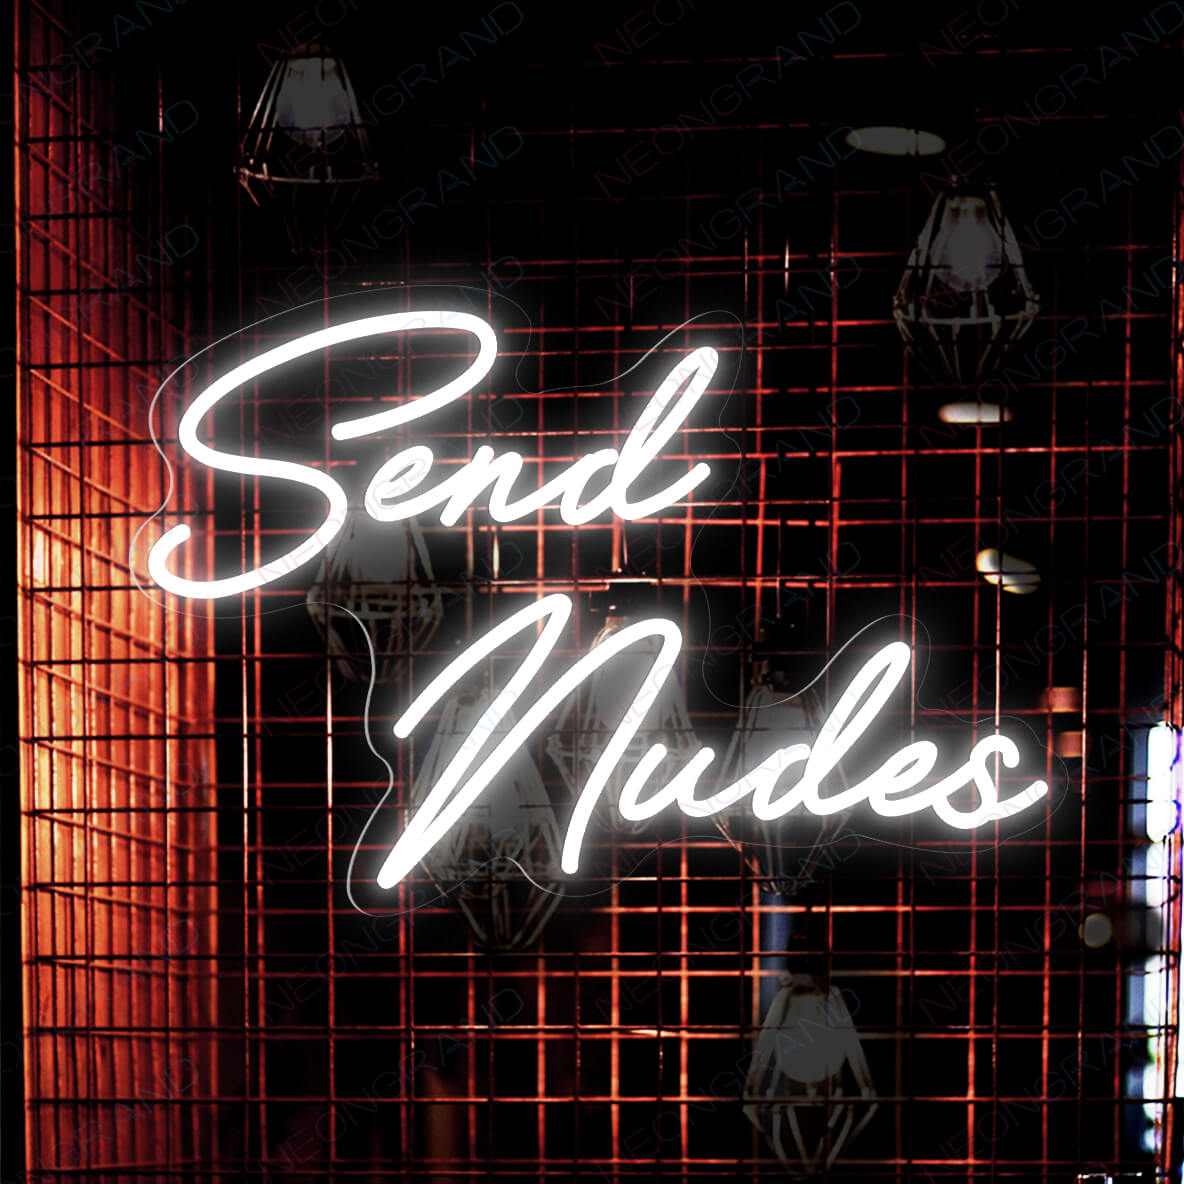 Send Nudes Neon Sign Sexy Led Light white